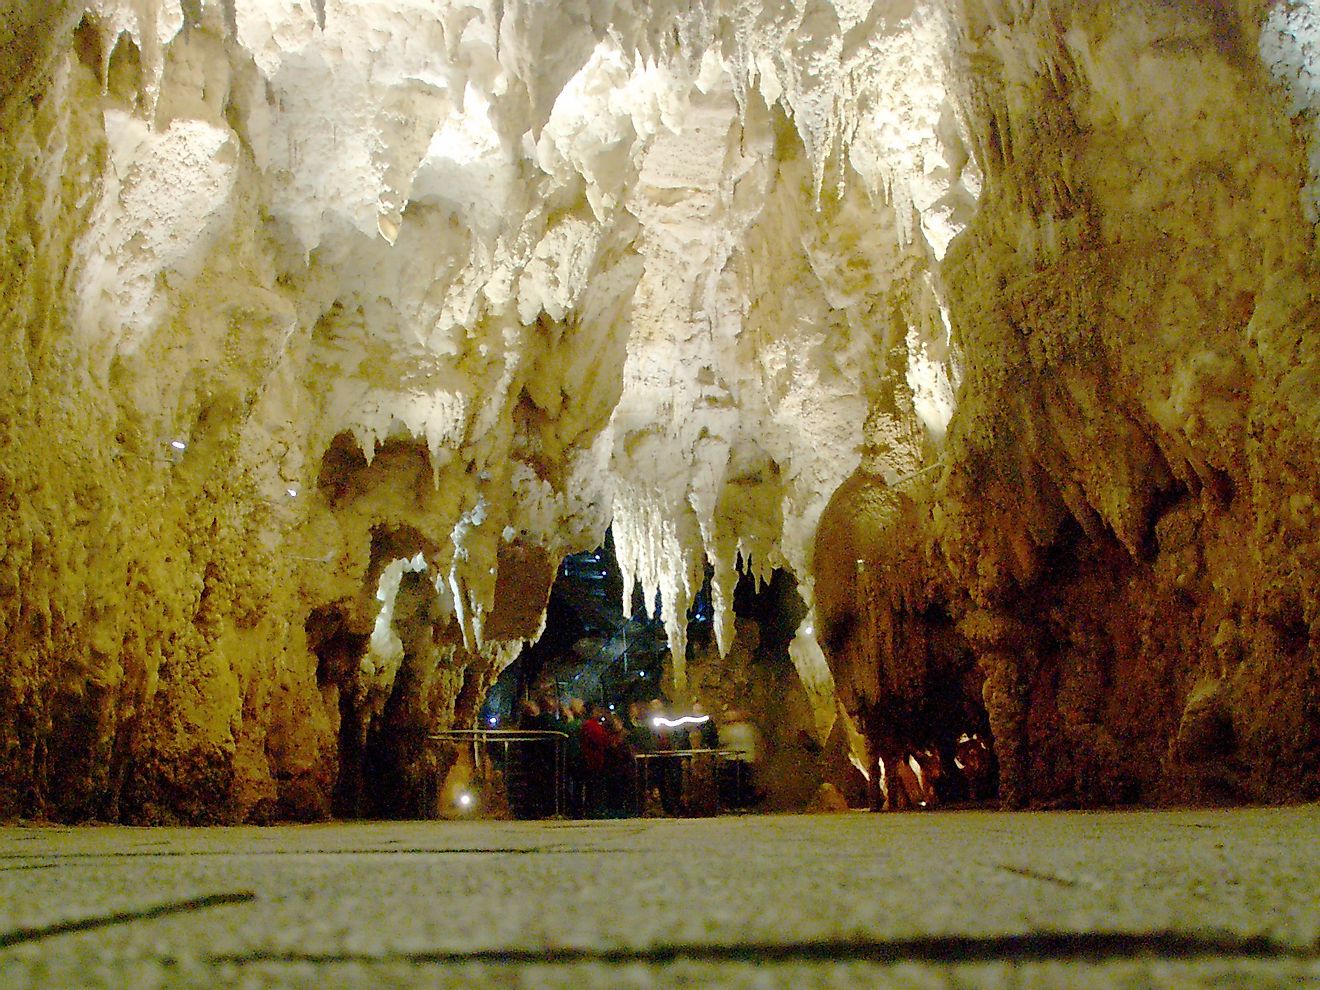 The "Cathedral" section of the Waitomo caves involves a series of stalactites shaped like the inside of a church, through which one can see the illuminated caves of the glowworms in the distance.